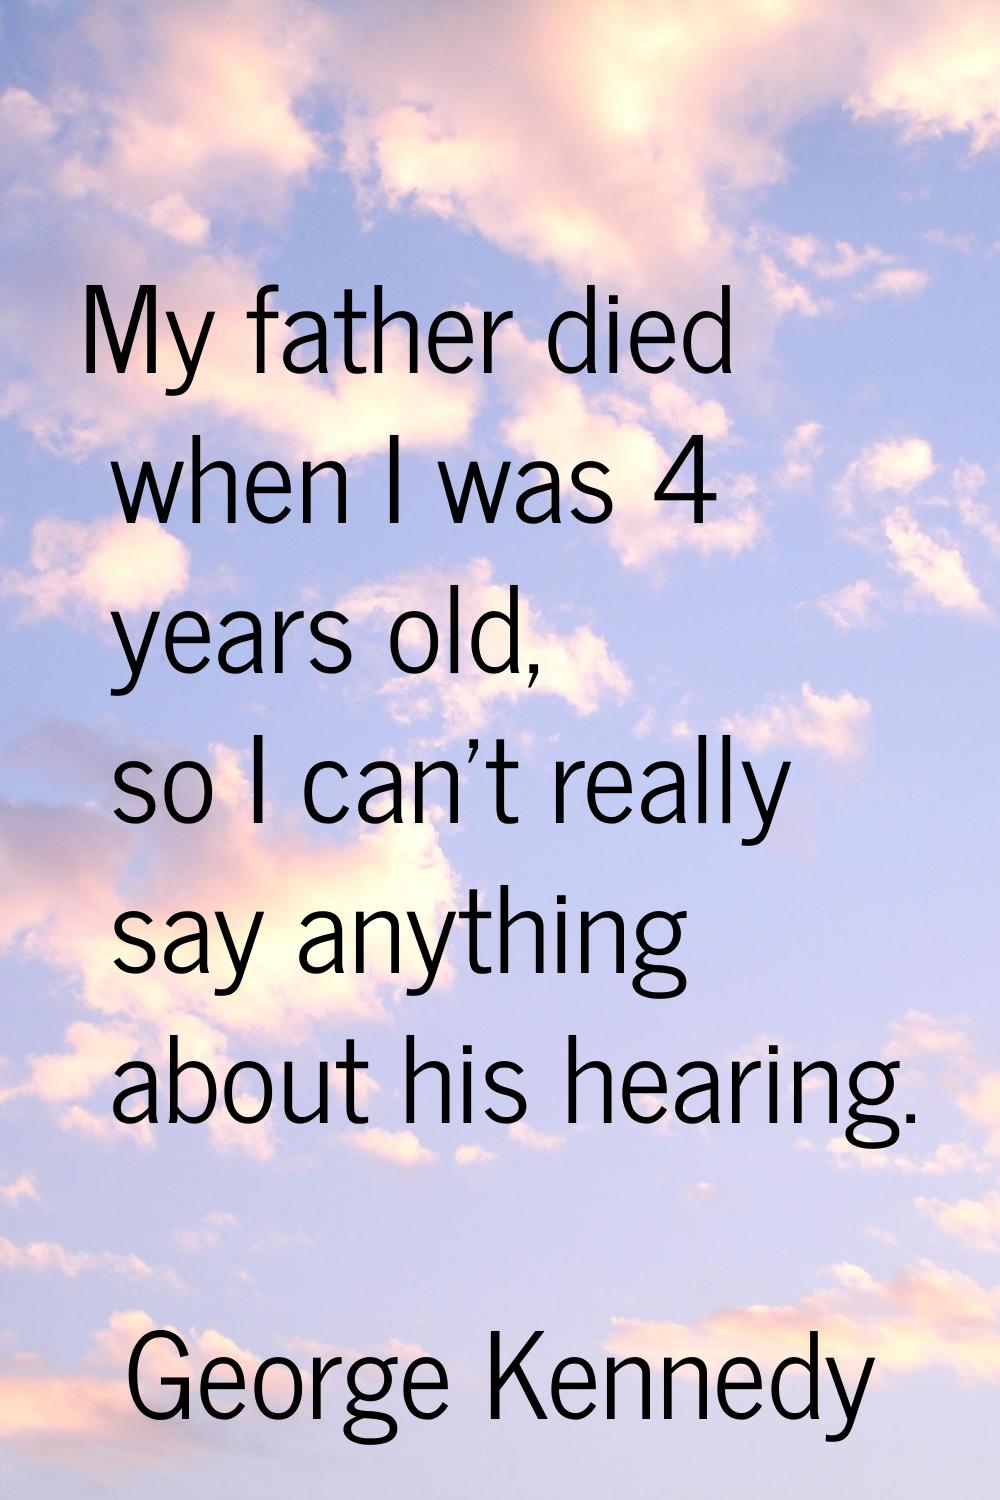 My father died when I was 4 years old, so I can't really say anything about his hearing.